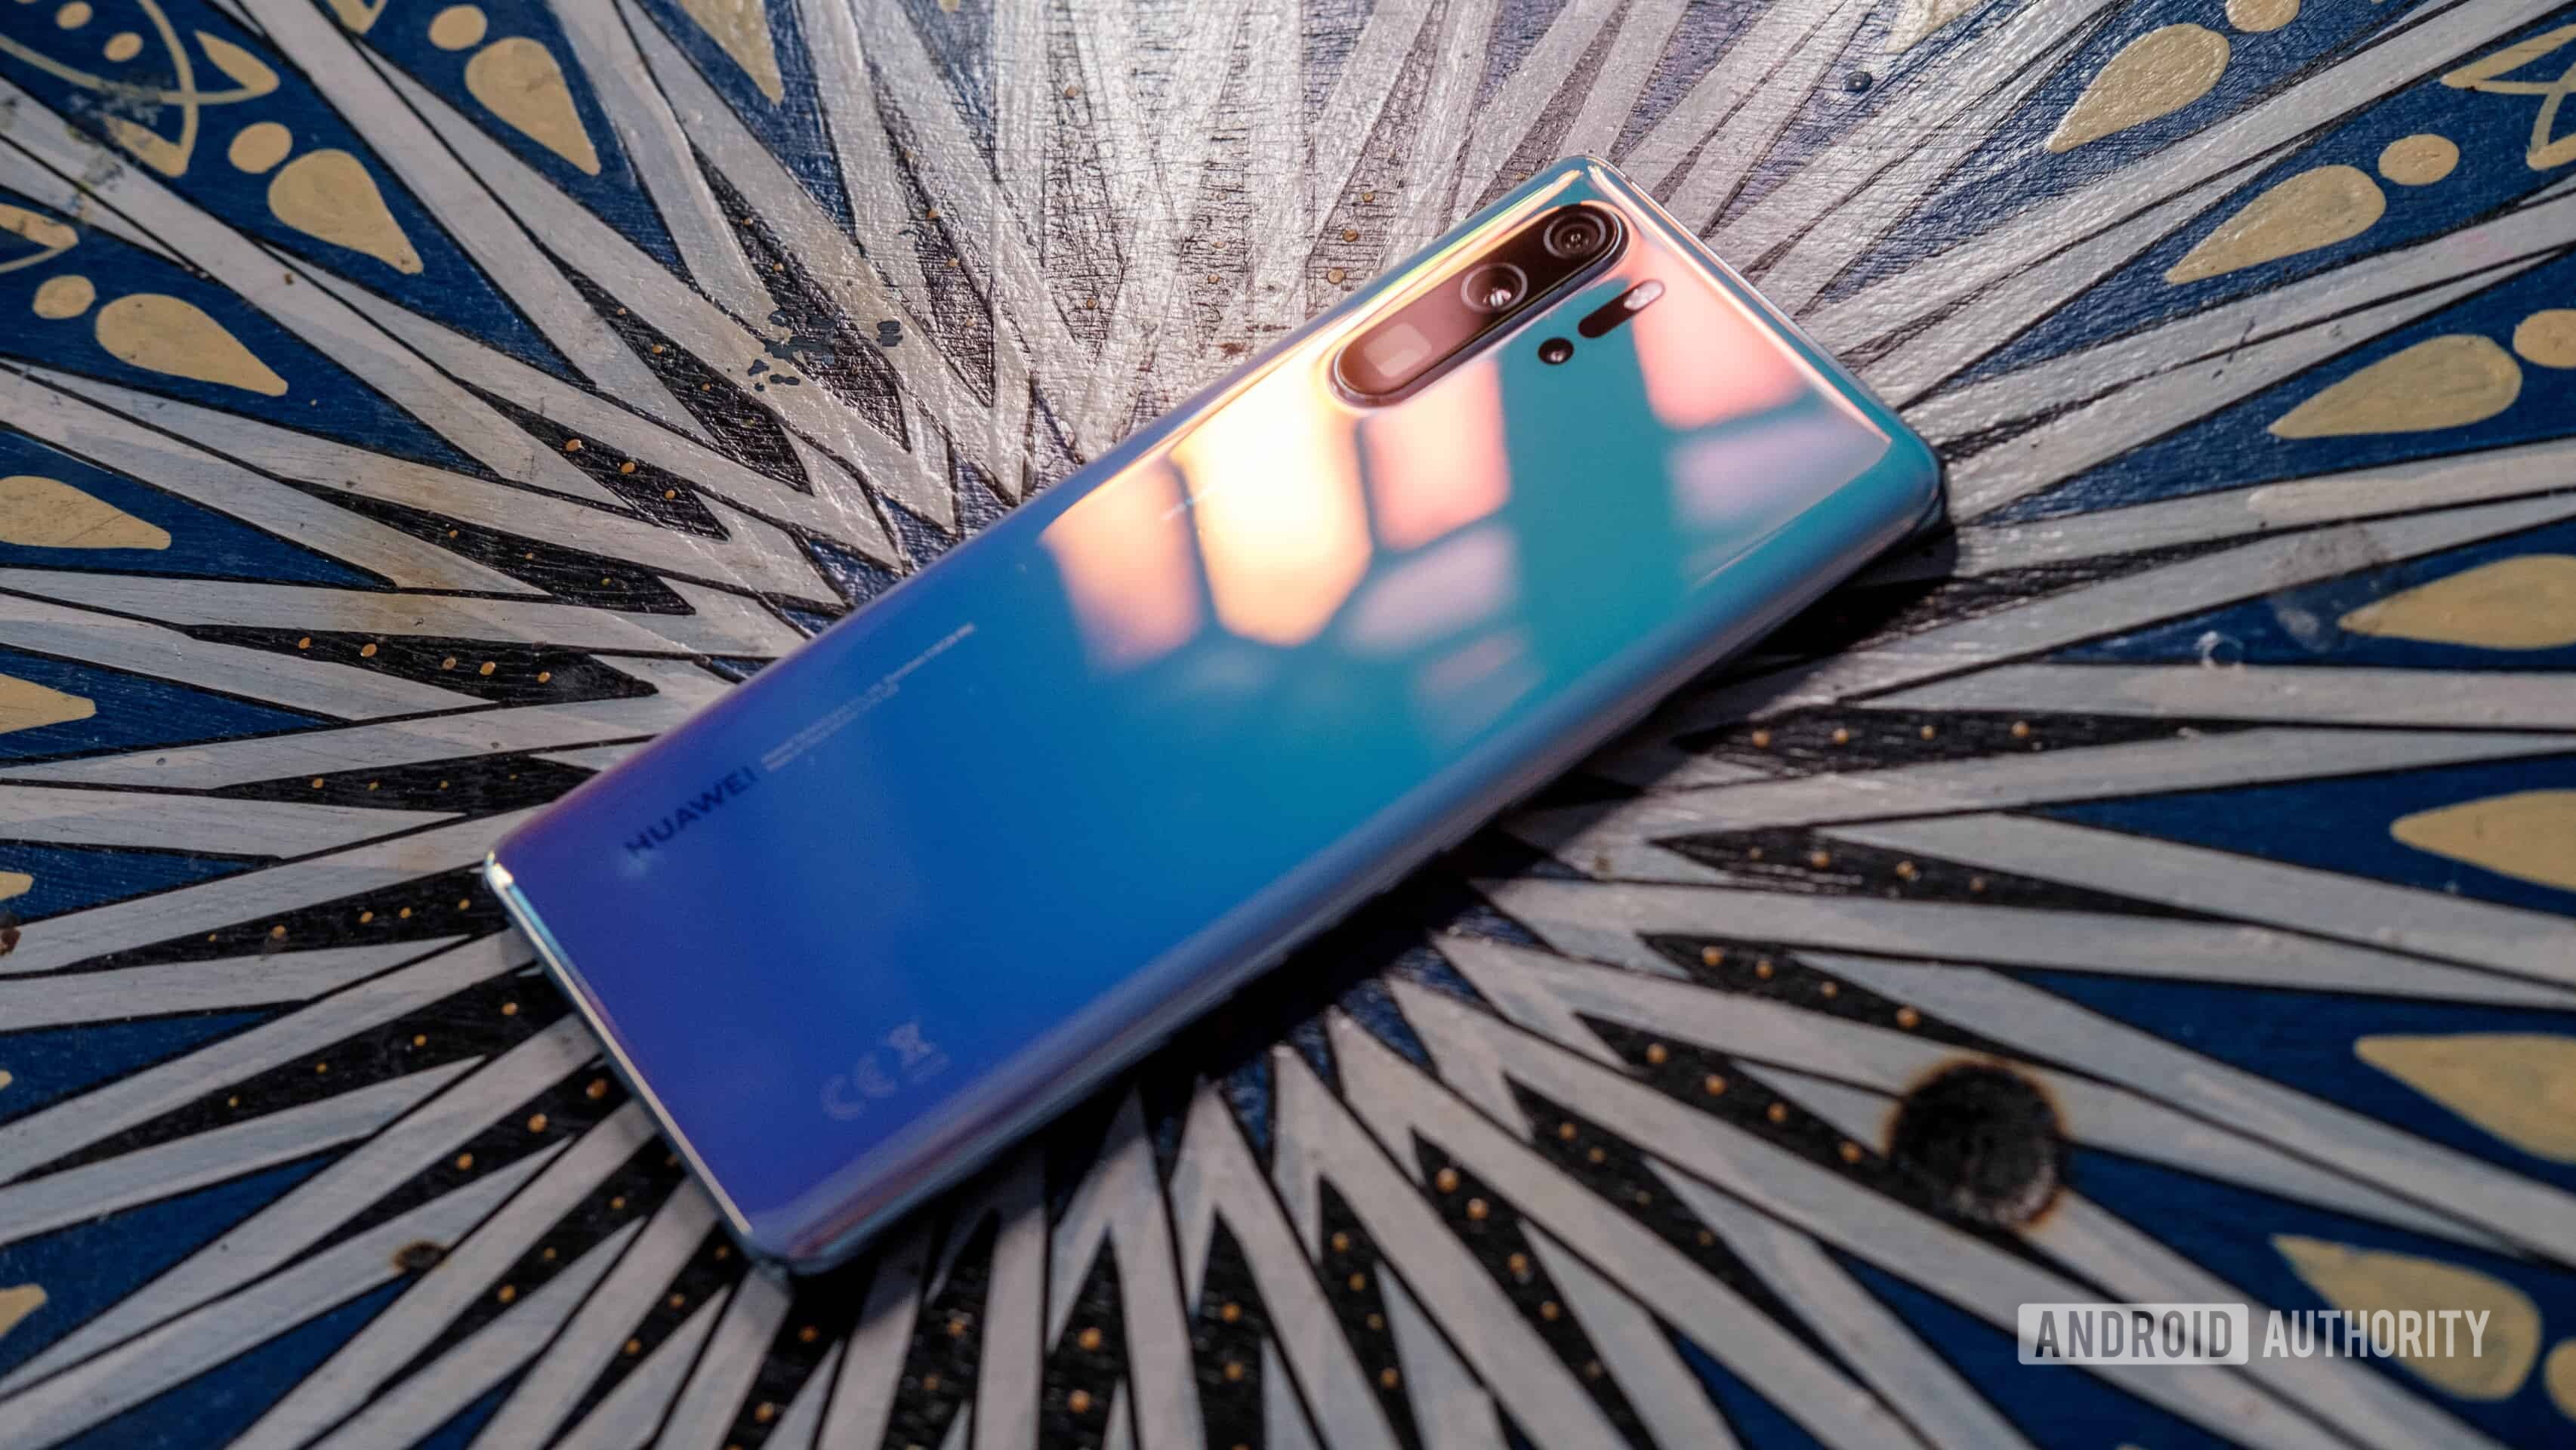 The HUAWEI P30 series still has Google support, but what about the Mate 30?